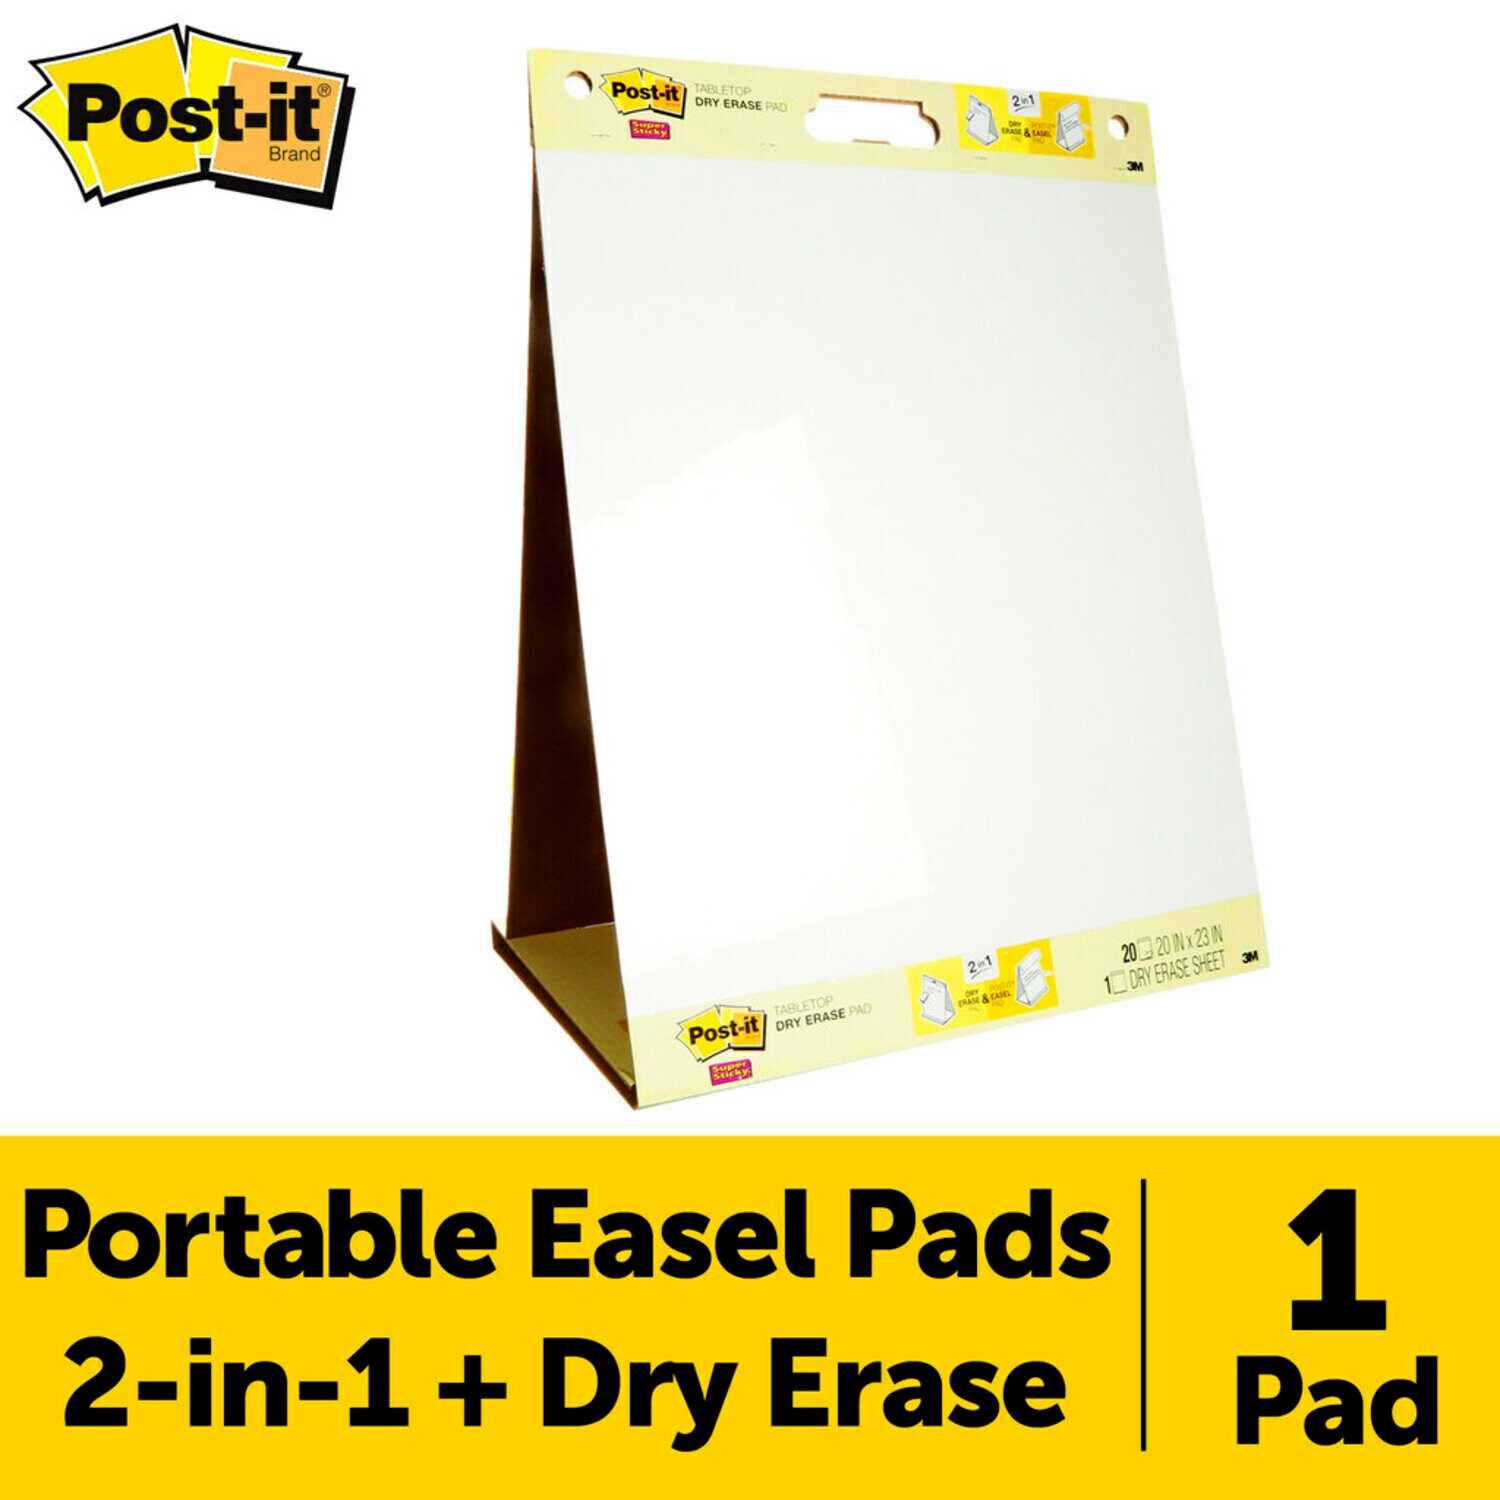 https://www.e-aircraftsupply.com/ItemImages/70/1707009E_post-itsuper-sticky-easel-pad.jpg